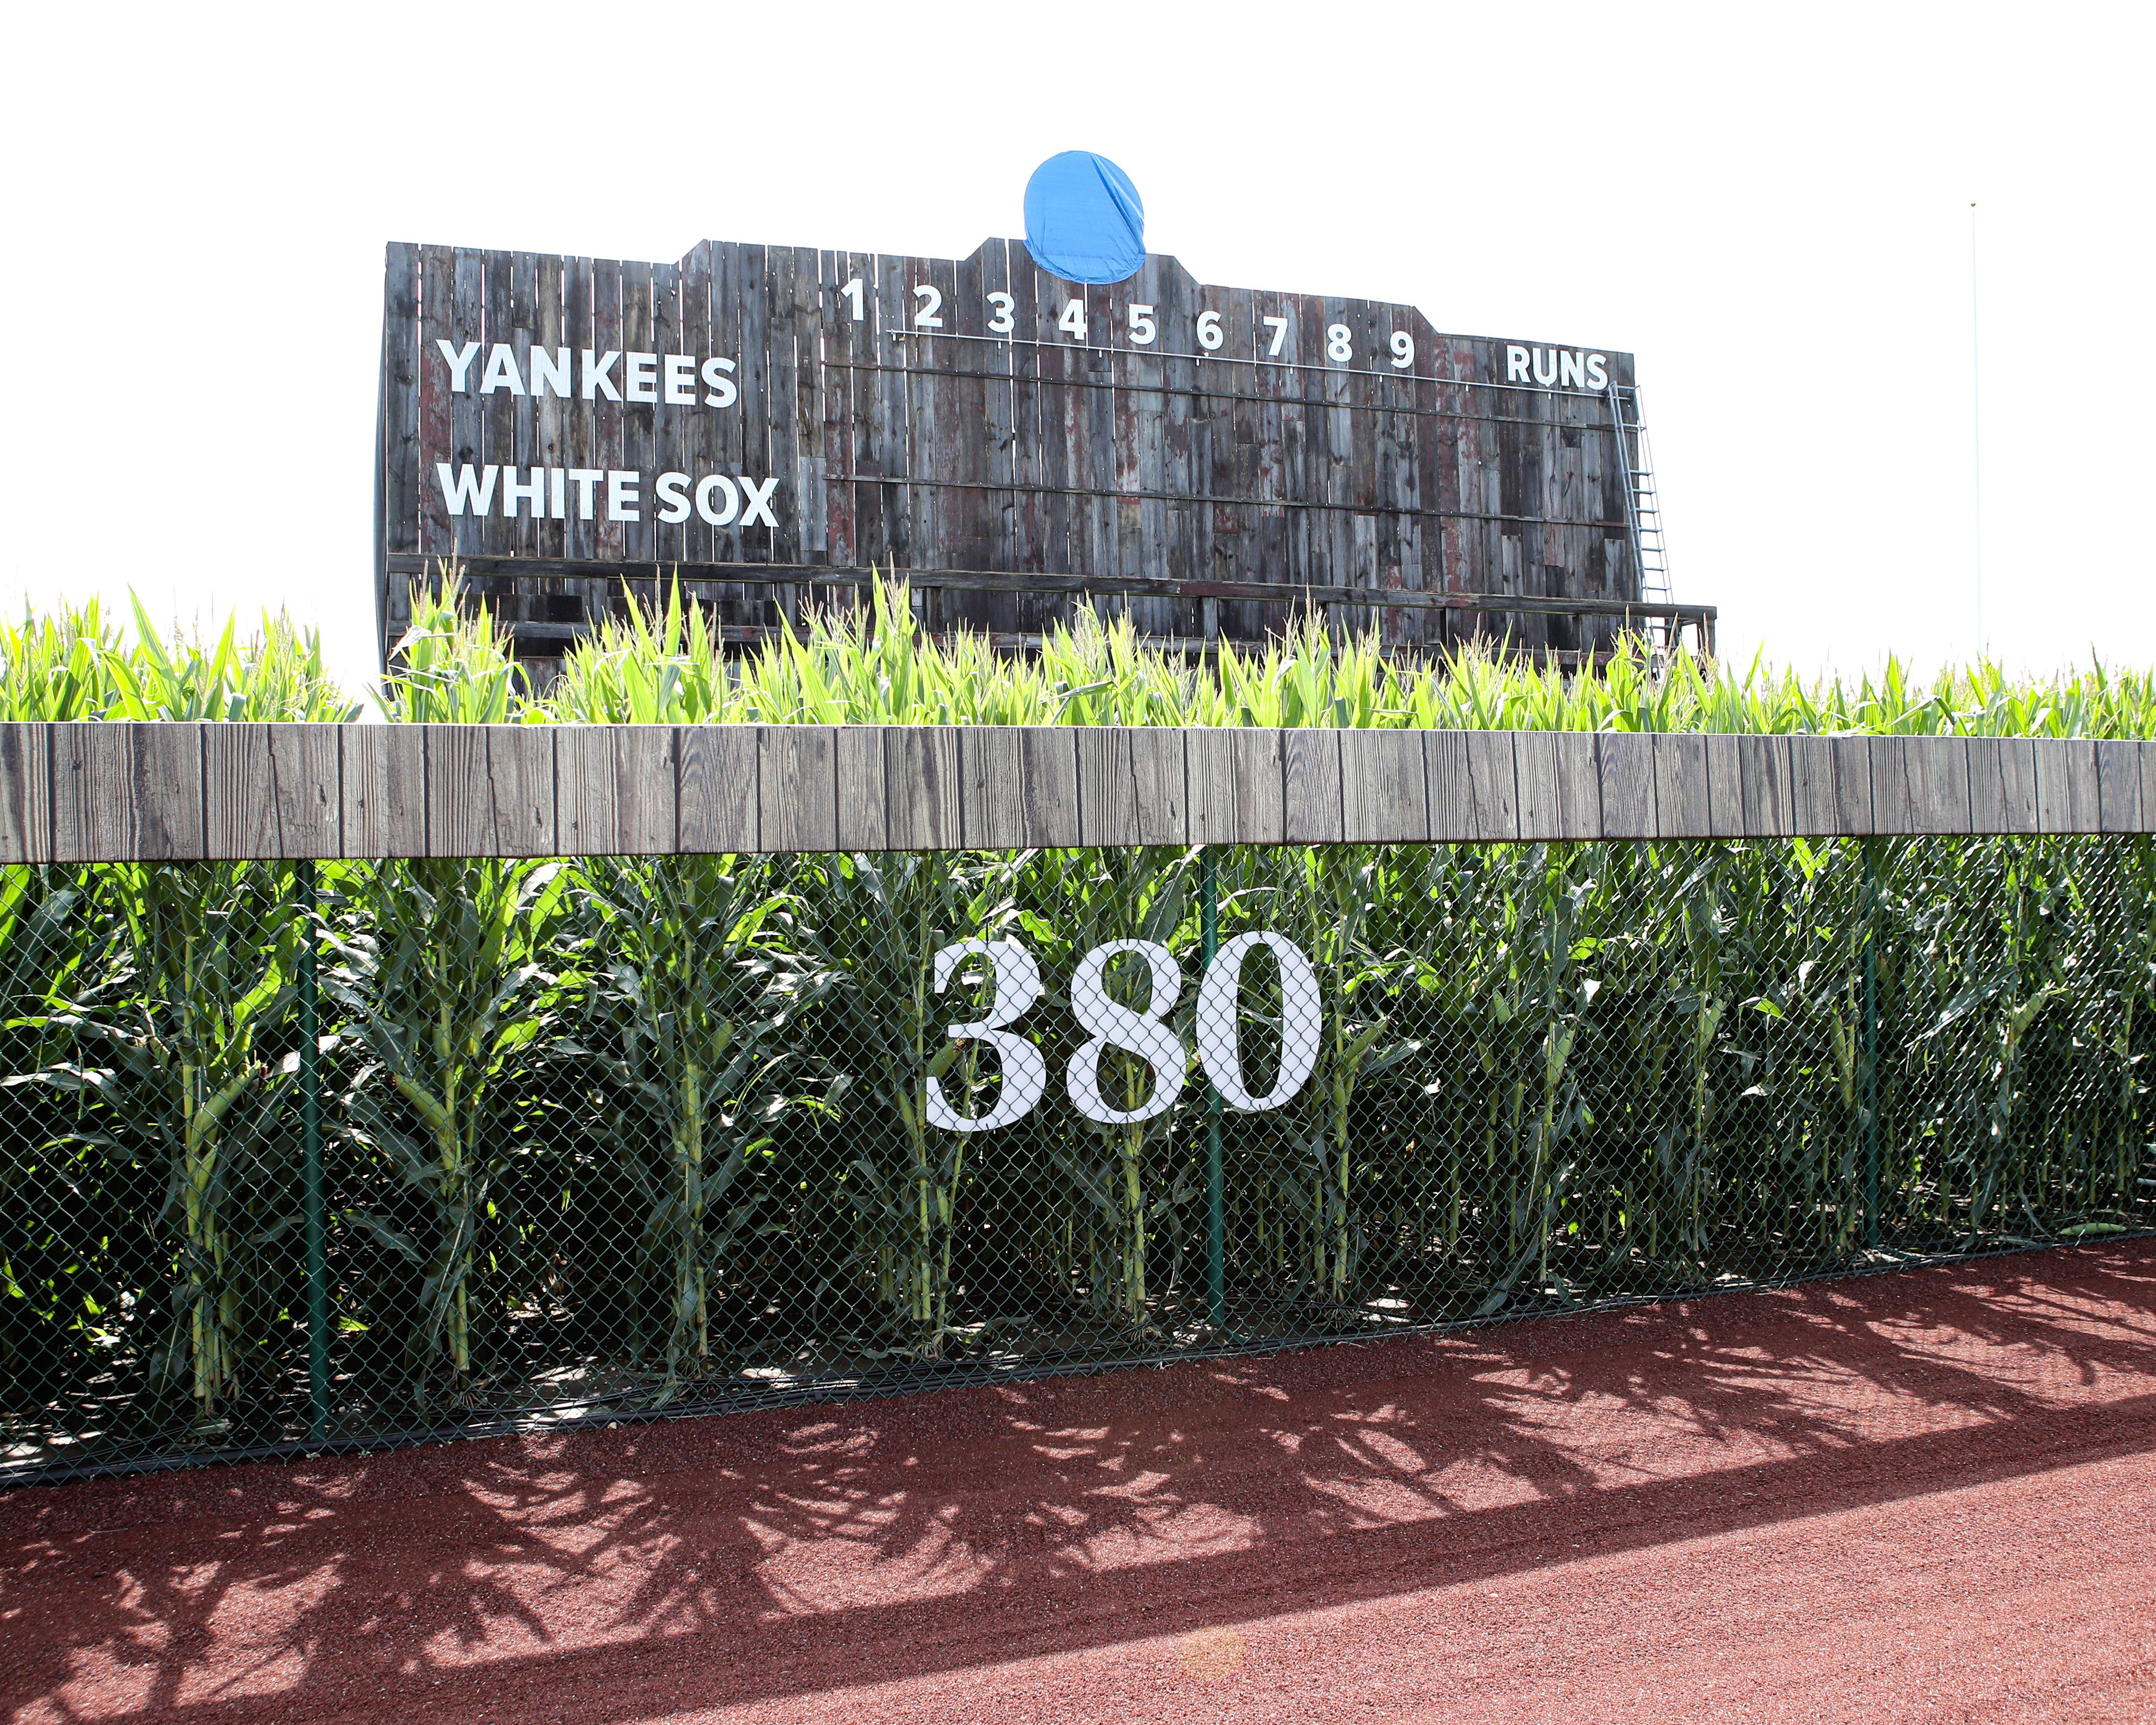 The outfield wall of the Field of Dreams in Dyersville, Iowa with a wooden scoreboard in the background